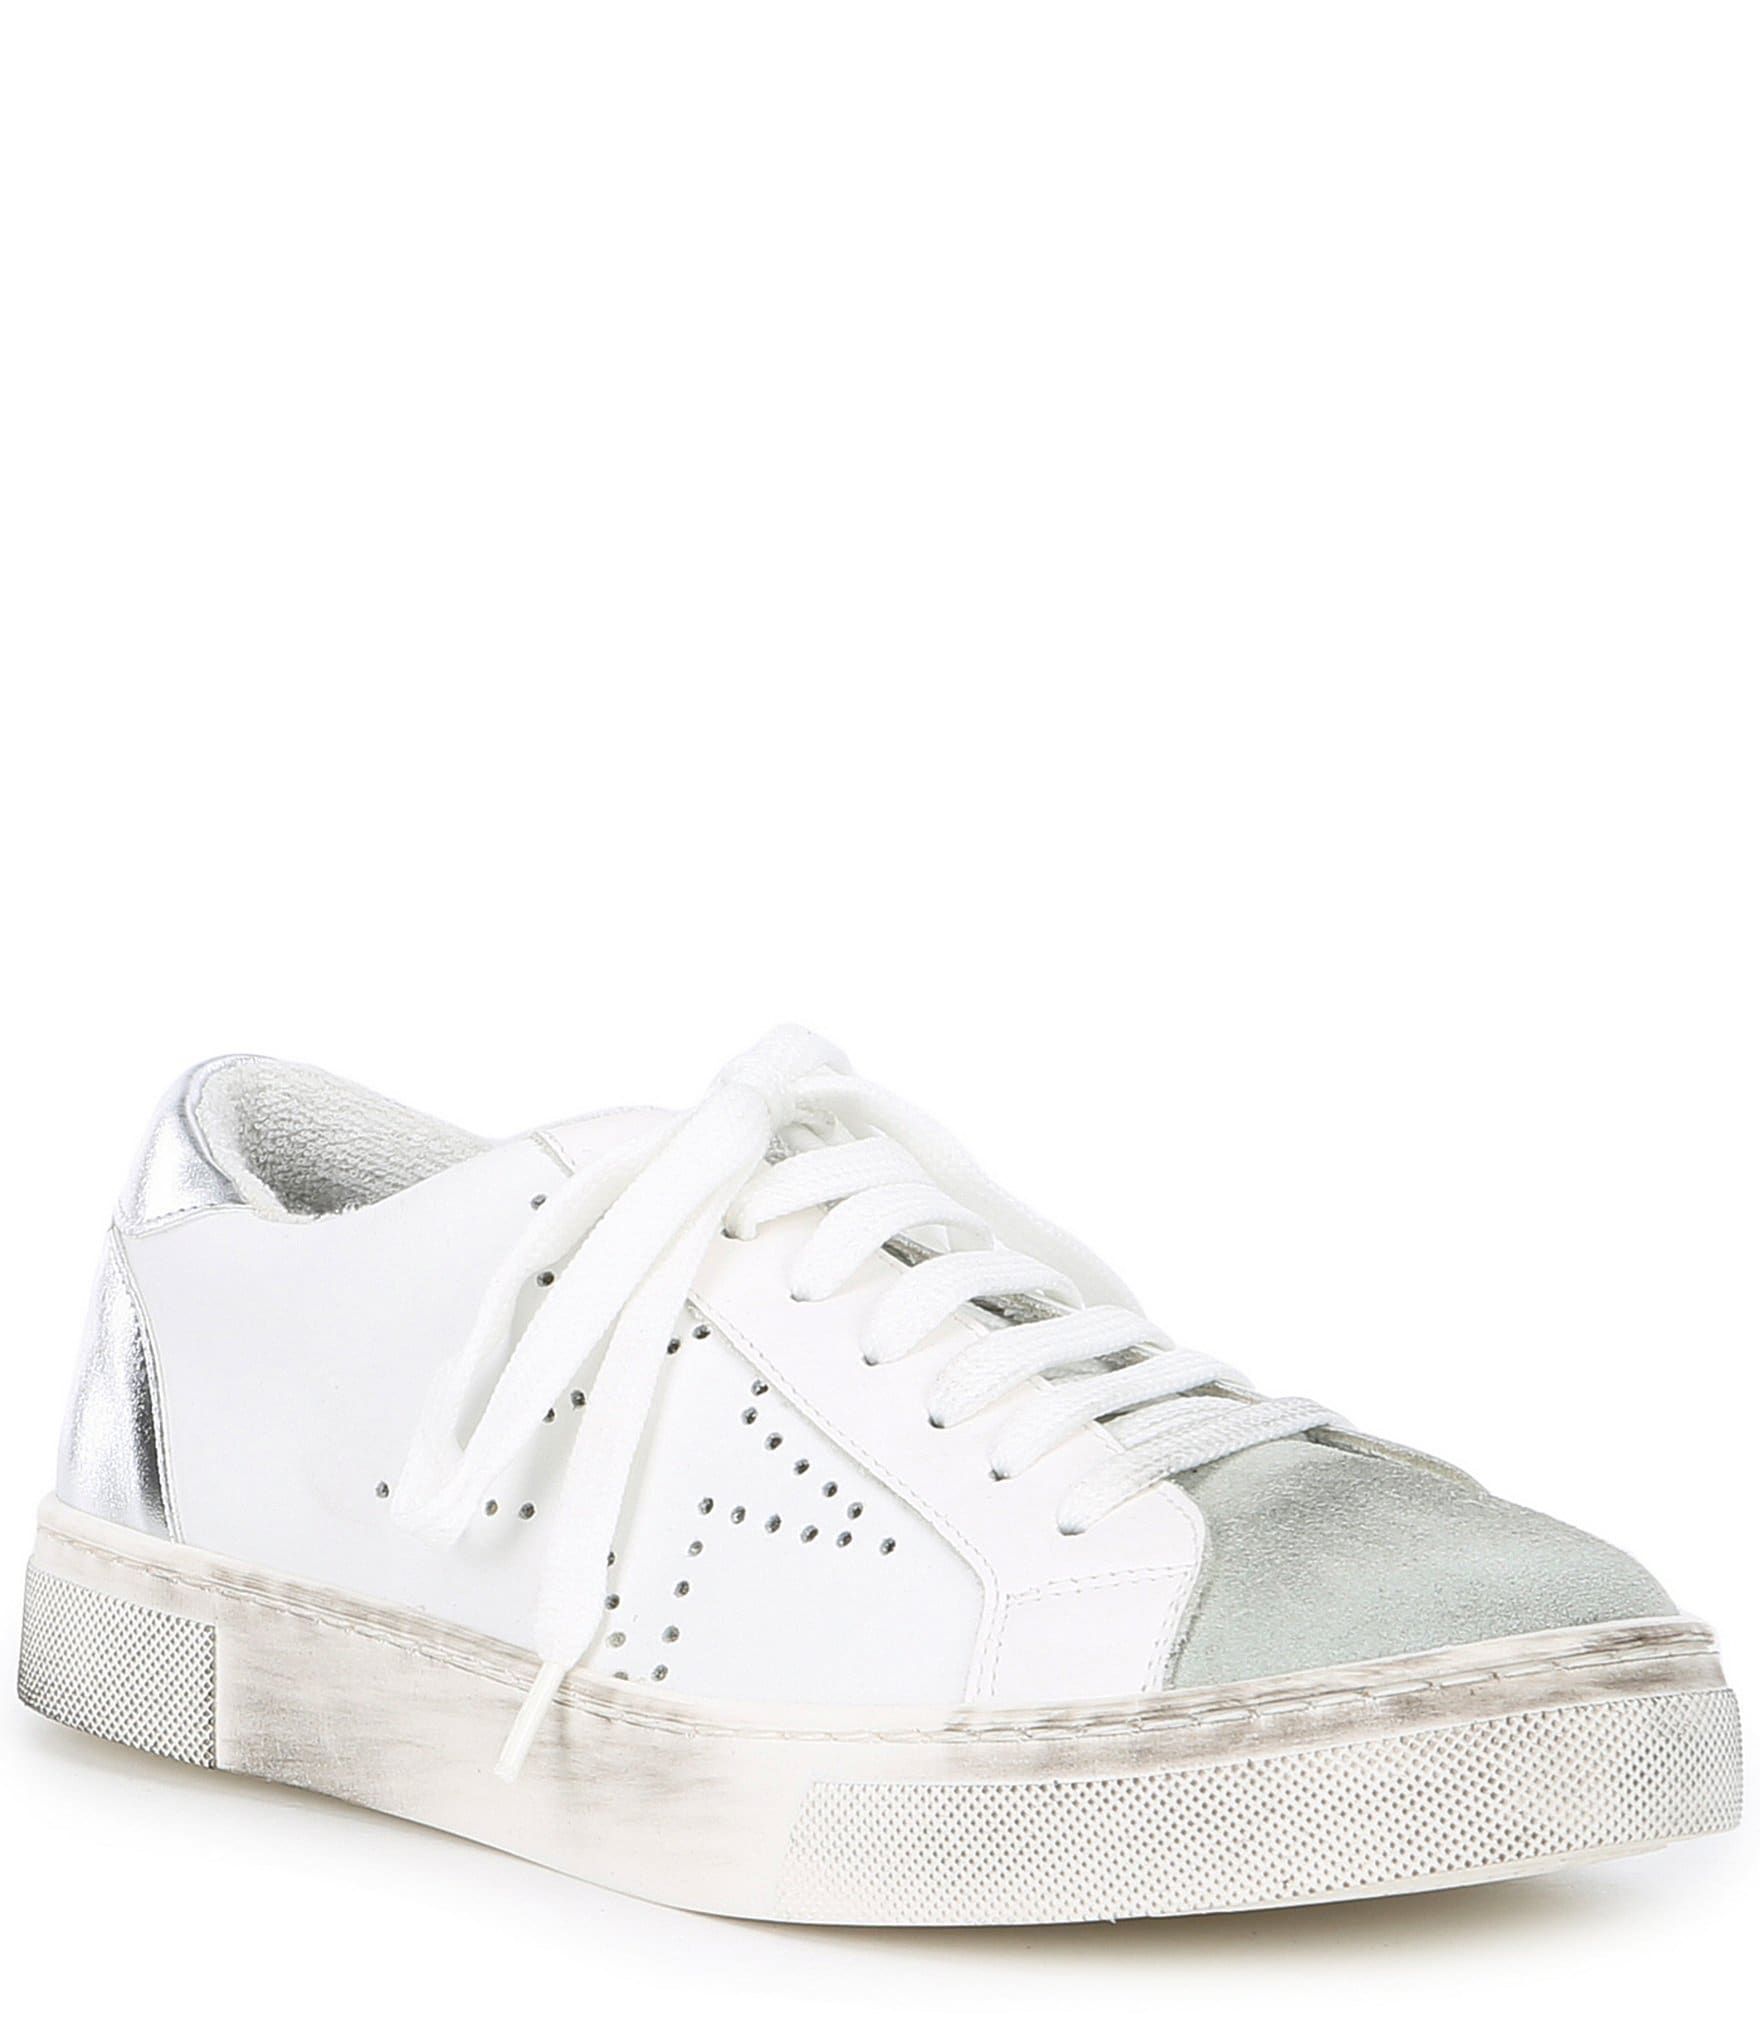 Steven by Steve Madden Rezza Leather and Suede Star Lace Up Sneakers | Dillards